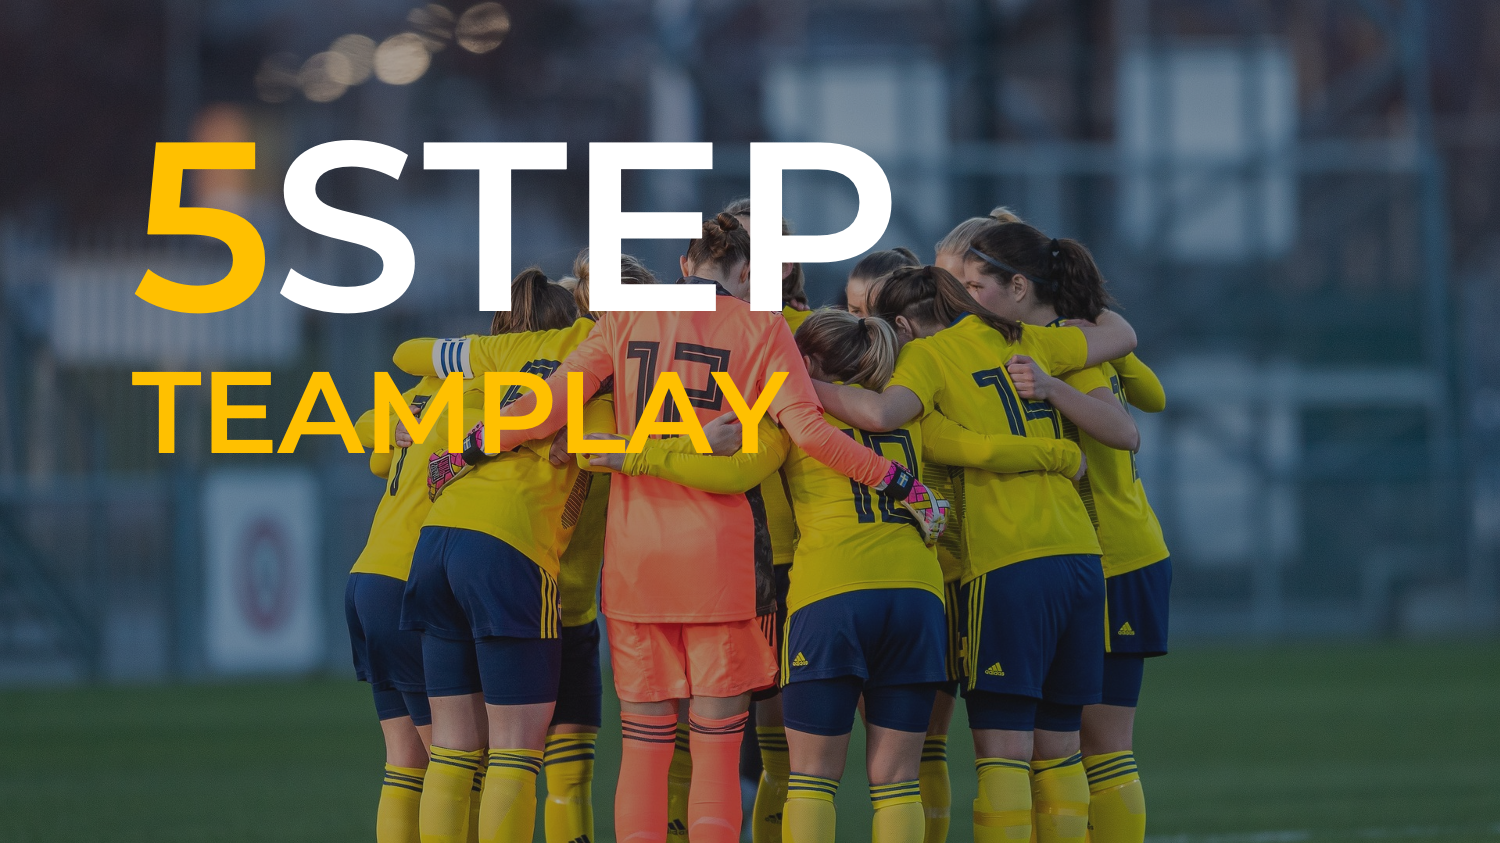 5STEP-Teamplay _Header _SPORTS01.png